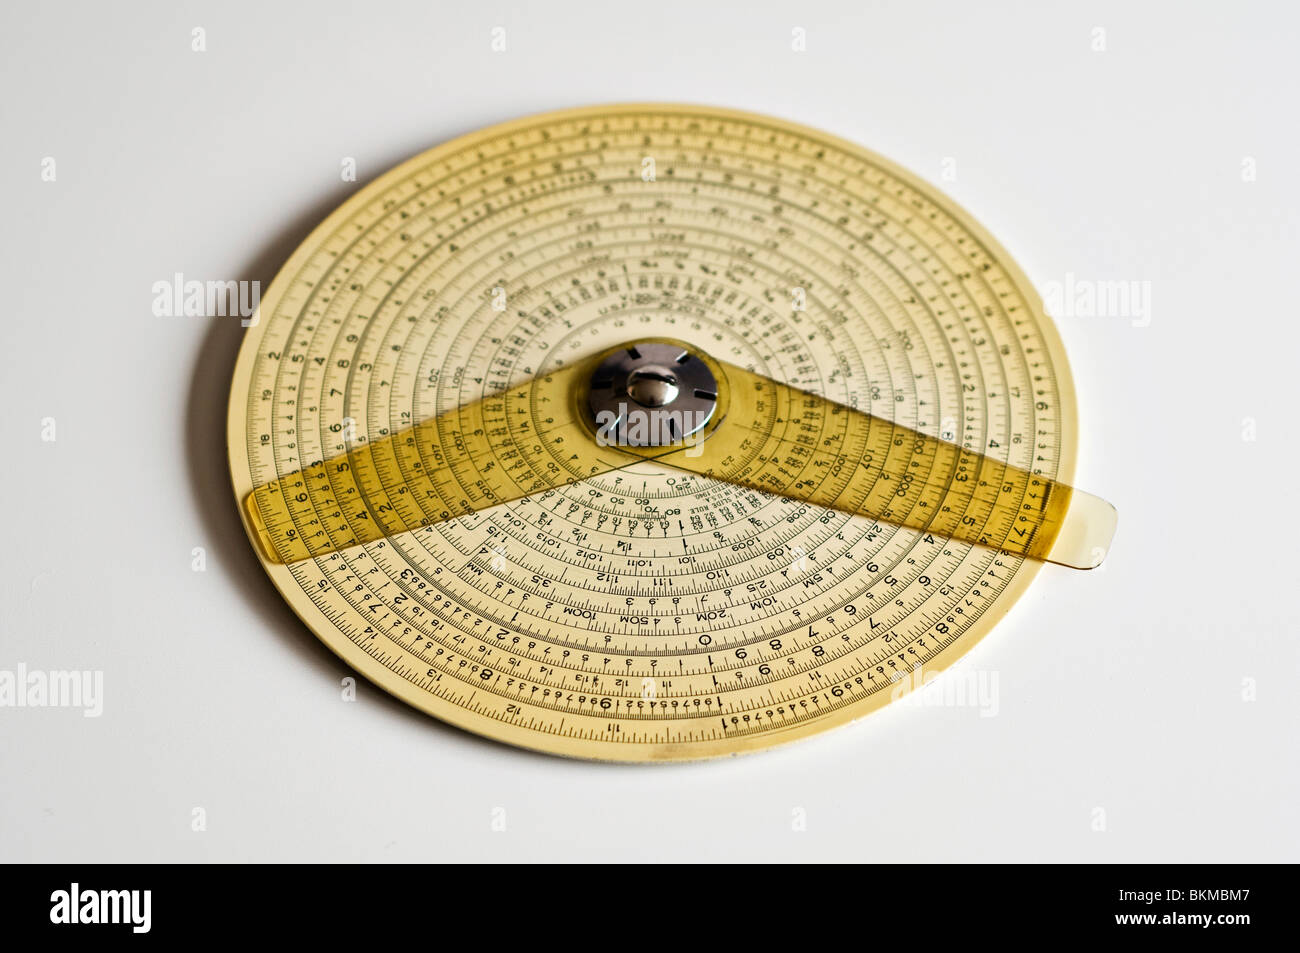 Concentric Binary Measuring Slide Ruler on white background. Stock Photo